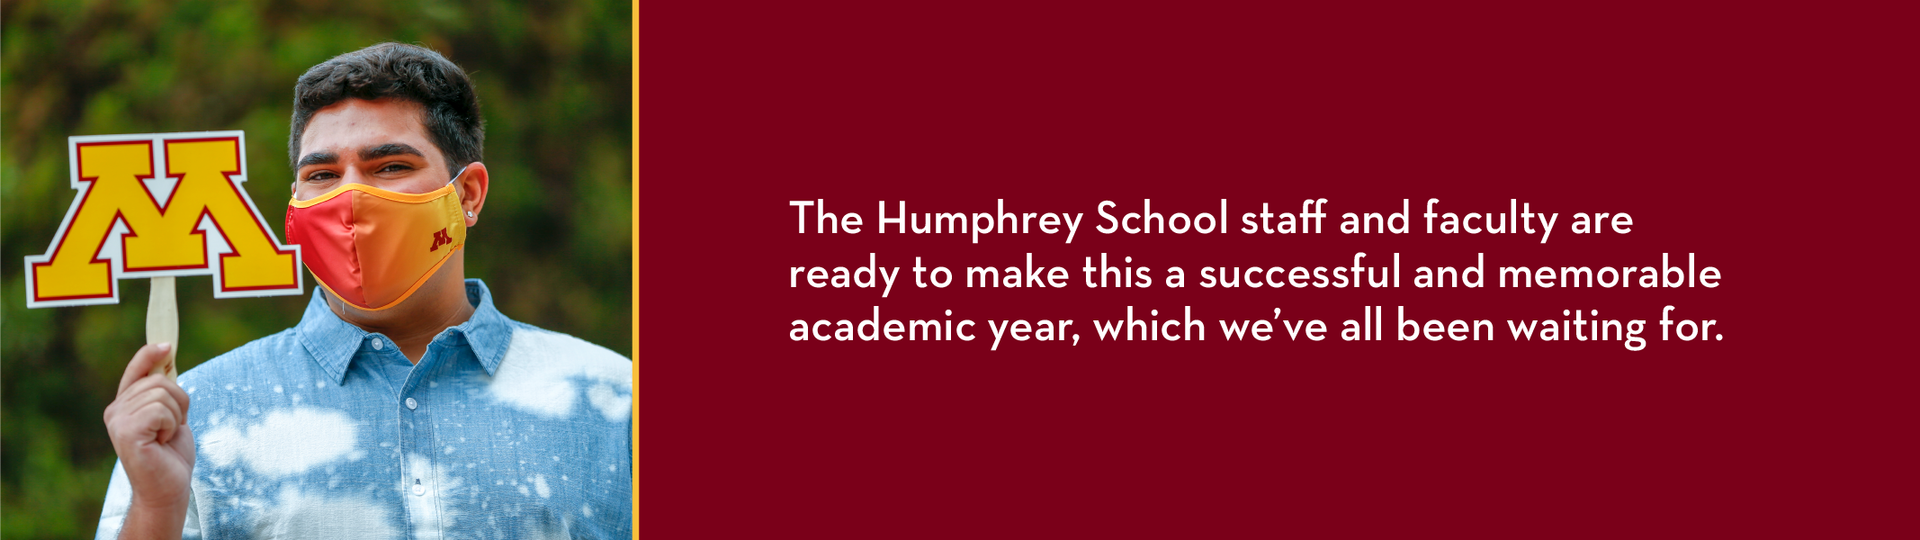 The Humphrey School staff and faculty are ready to make this a successful and memorable academic year, which we've all been waiting for.